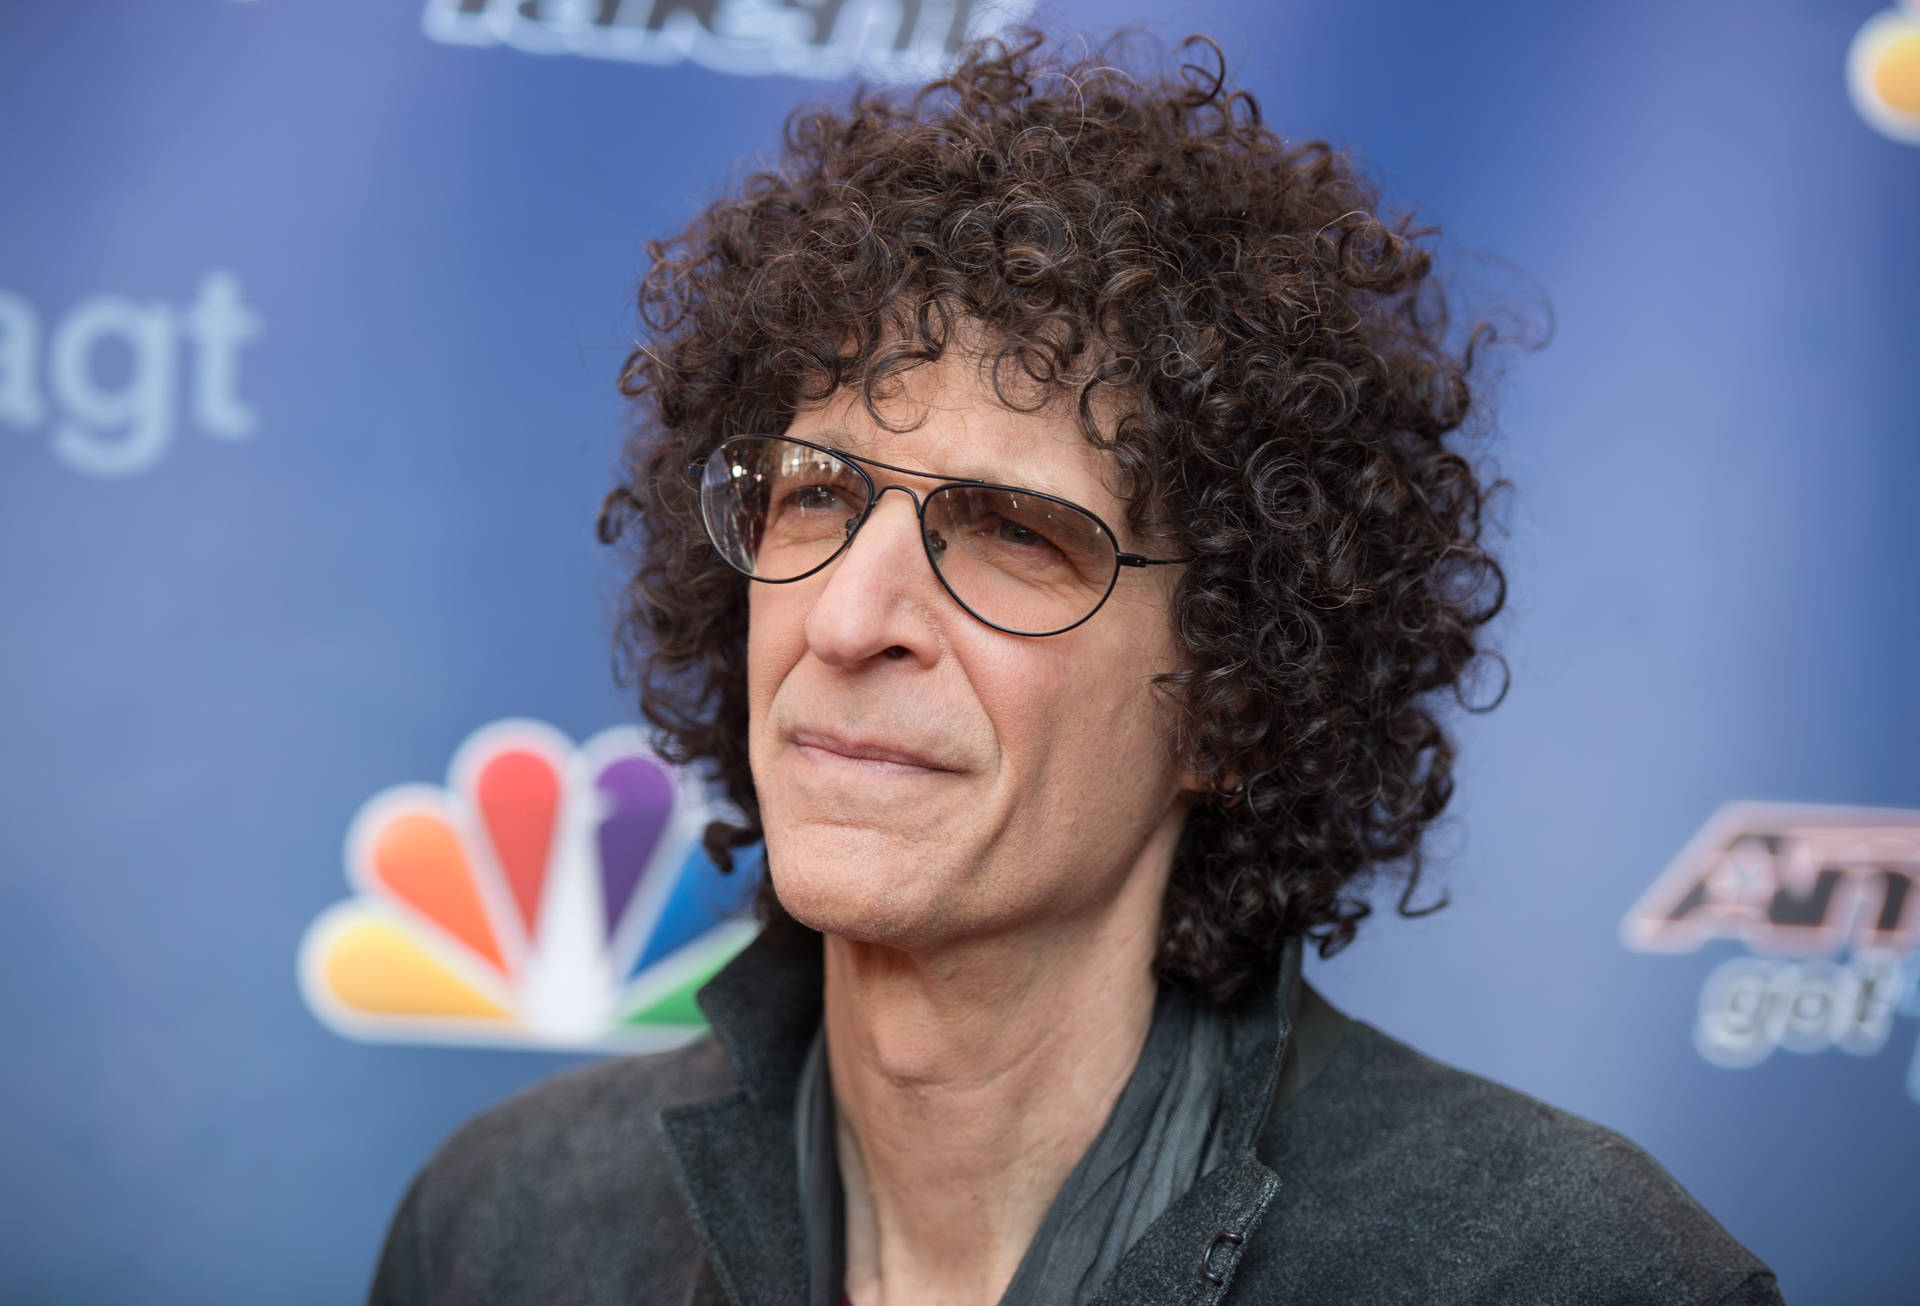 Howardstern Nbc Doesn't Directly Relate To Computer Or Mobile Wallpaper. It Seems To Be About The American Radio Personality And His Association With The Nbc Network. Could You Please Provide Sentences Related To Computer Or Mobile Wallpaper? Wallpaper